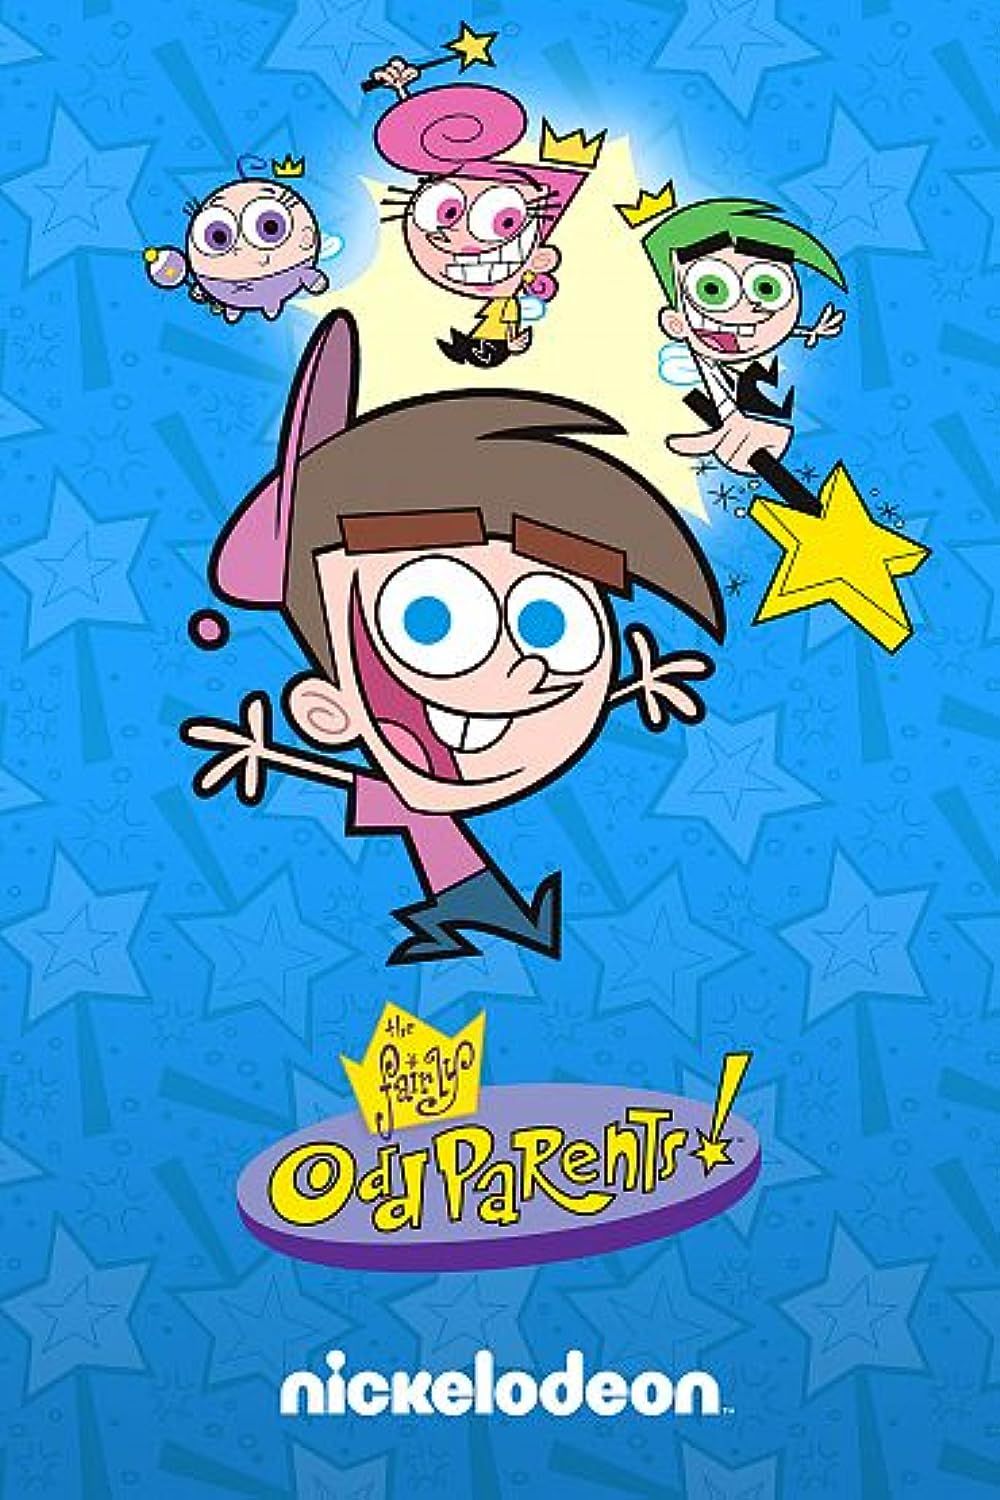 fairly oddparents sequel series gets first trailer, premiere date